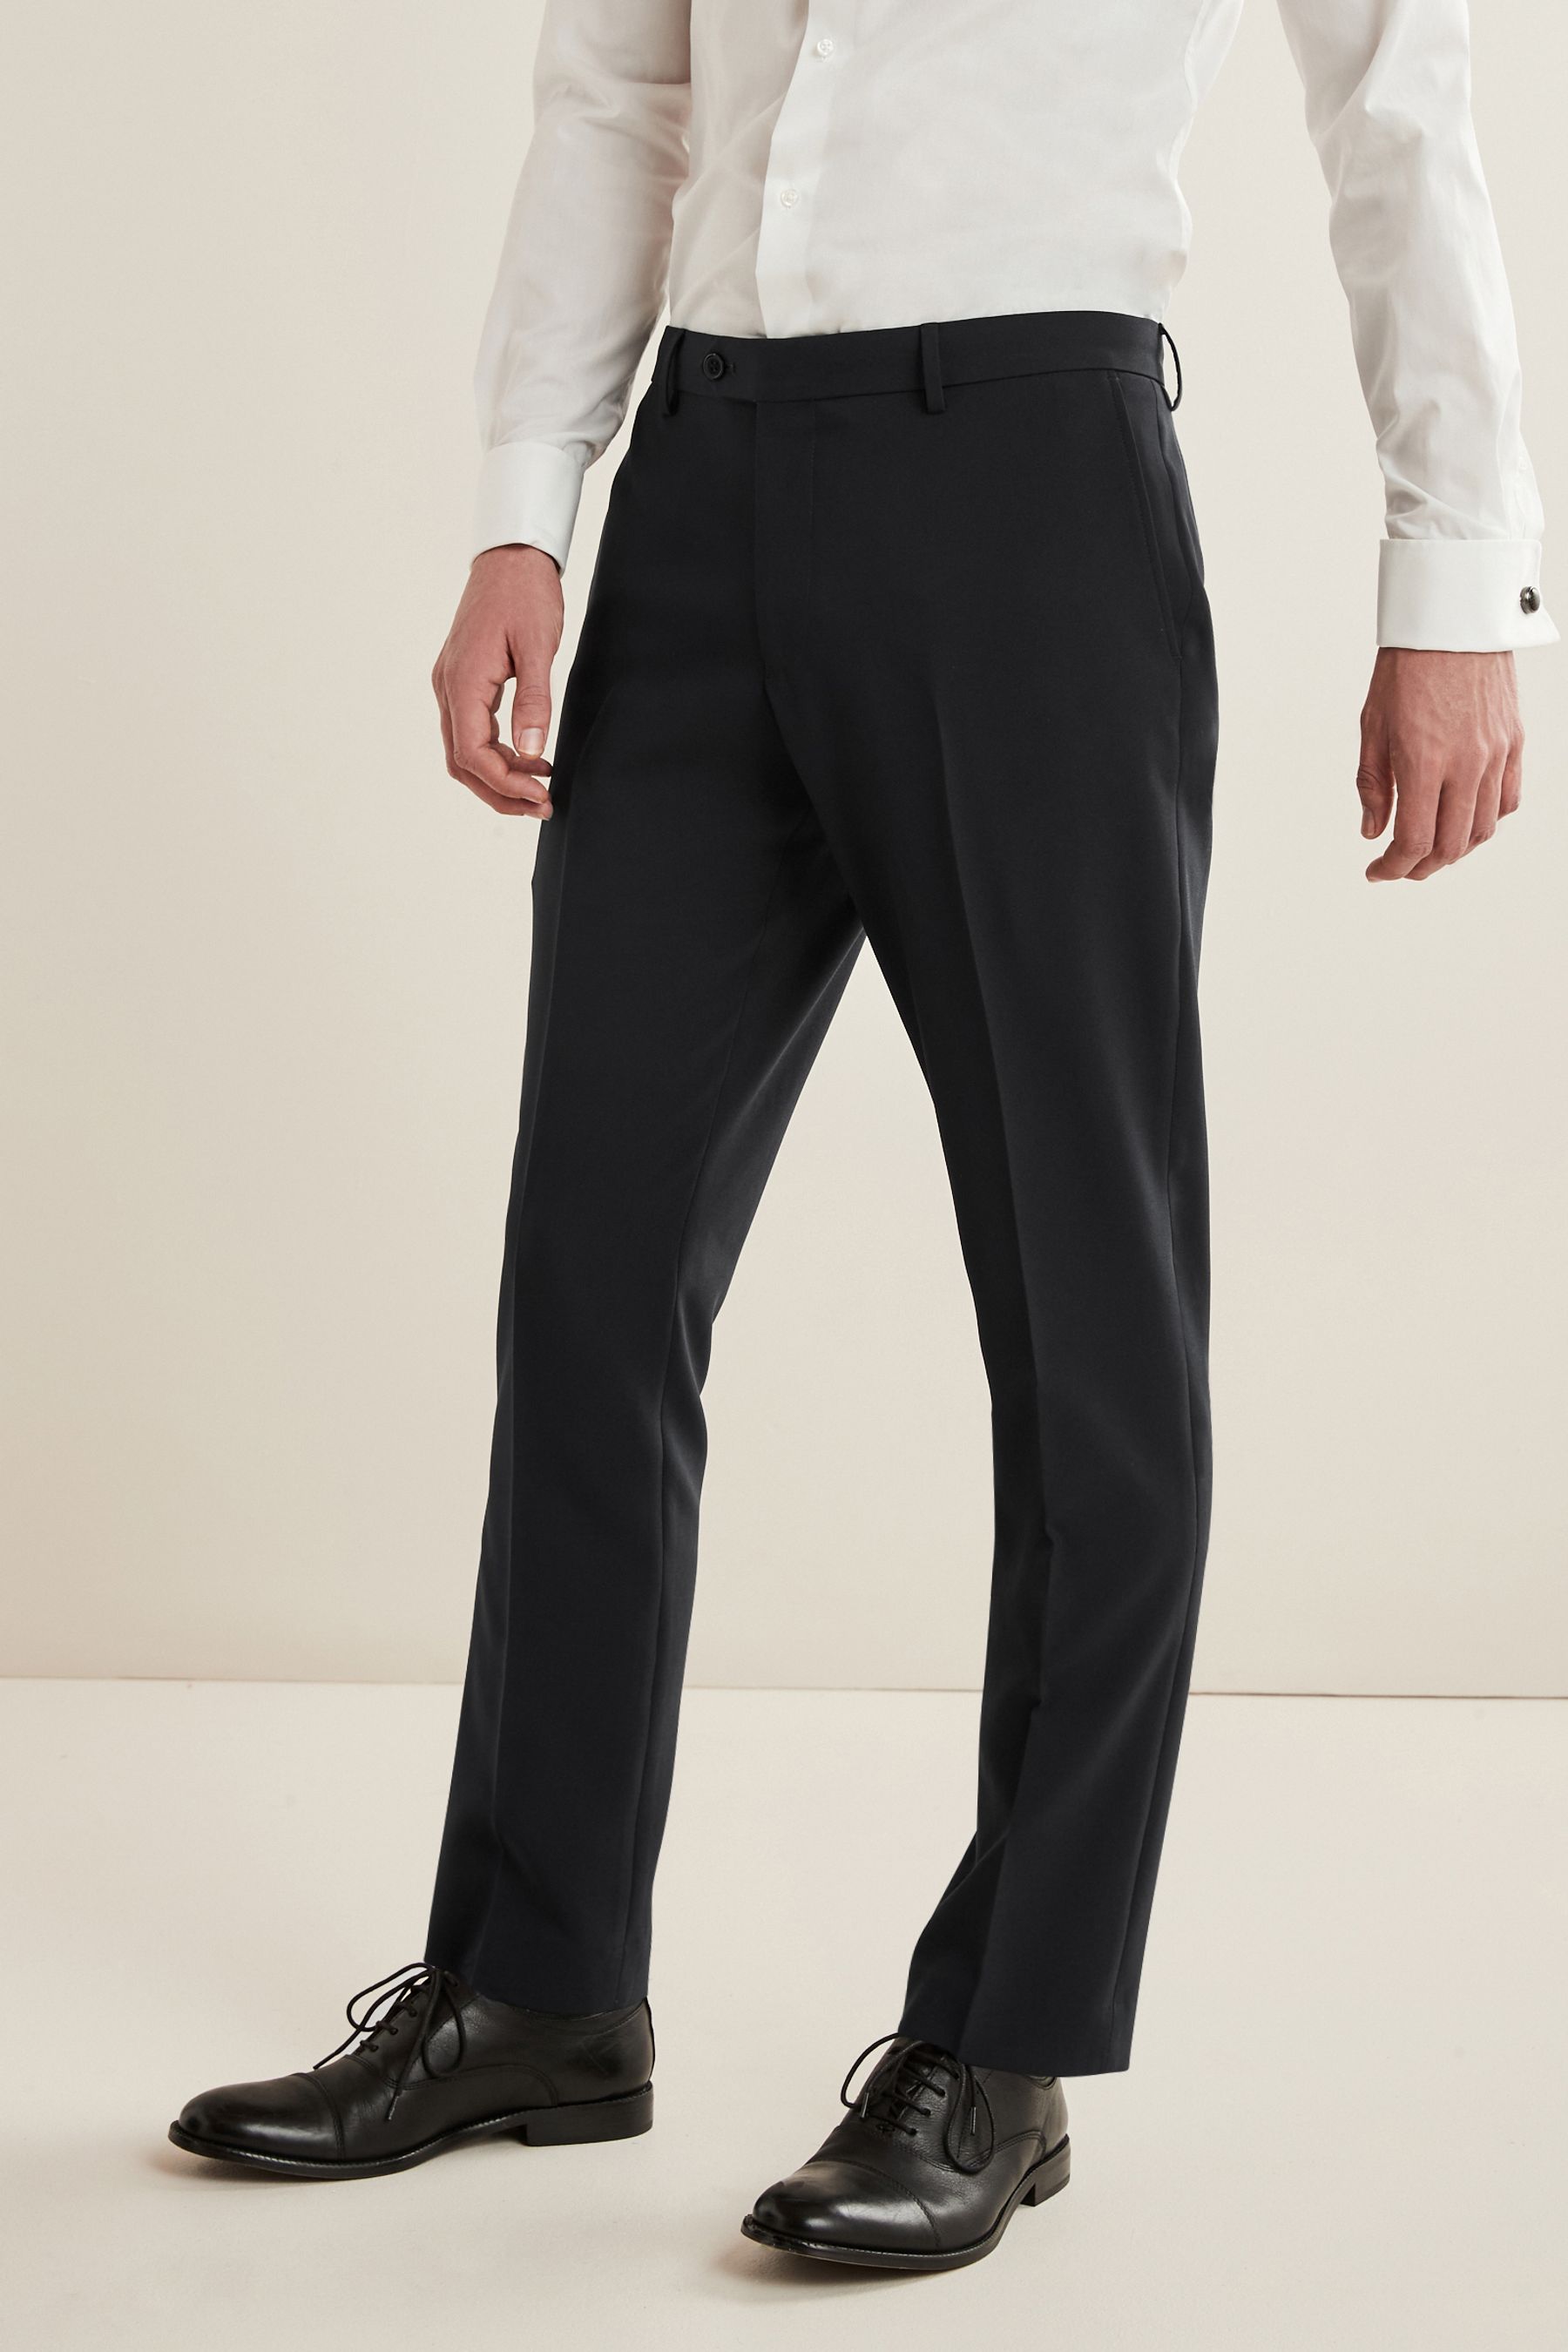 Buy Essential Suit: Trousers from Next Ireland